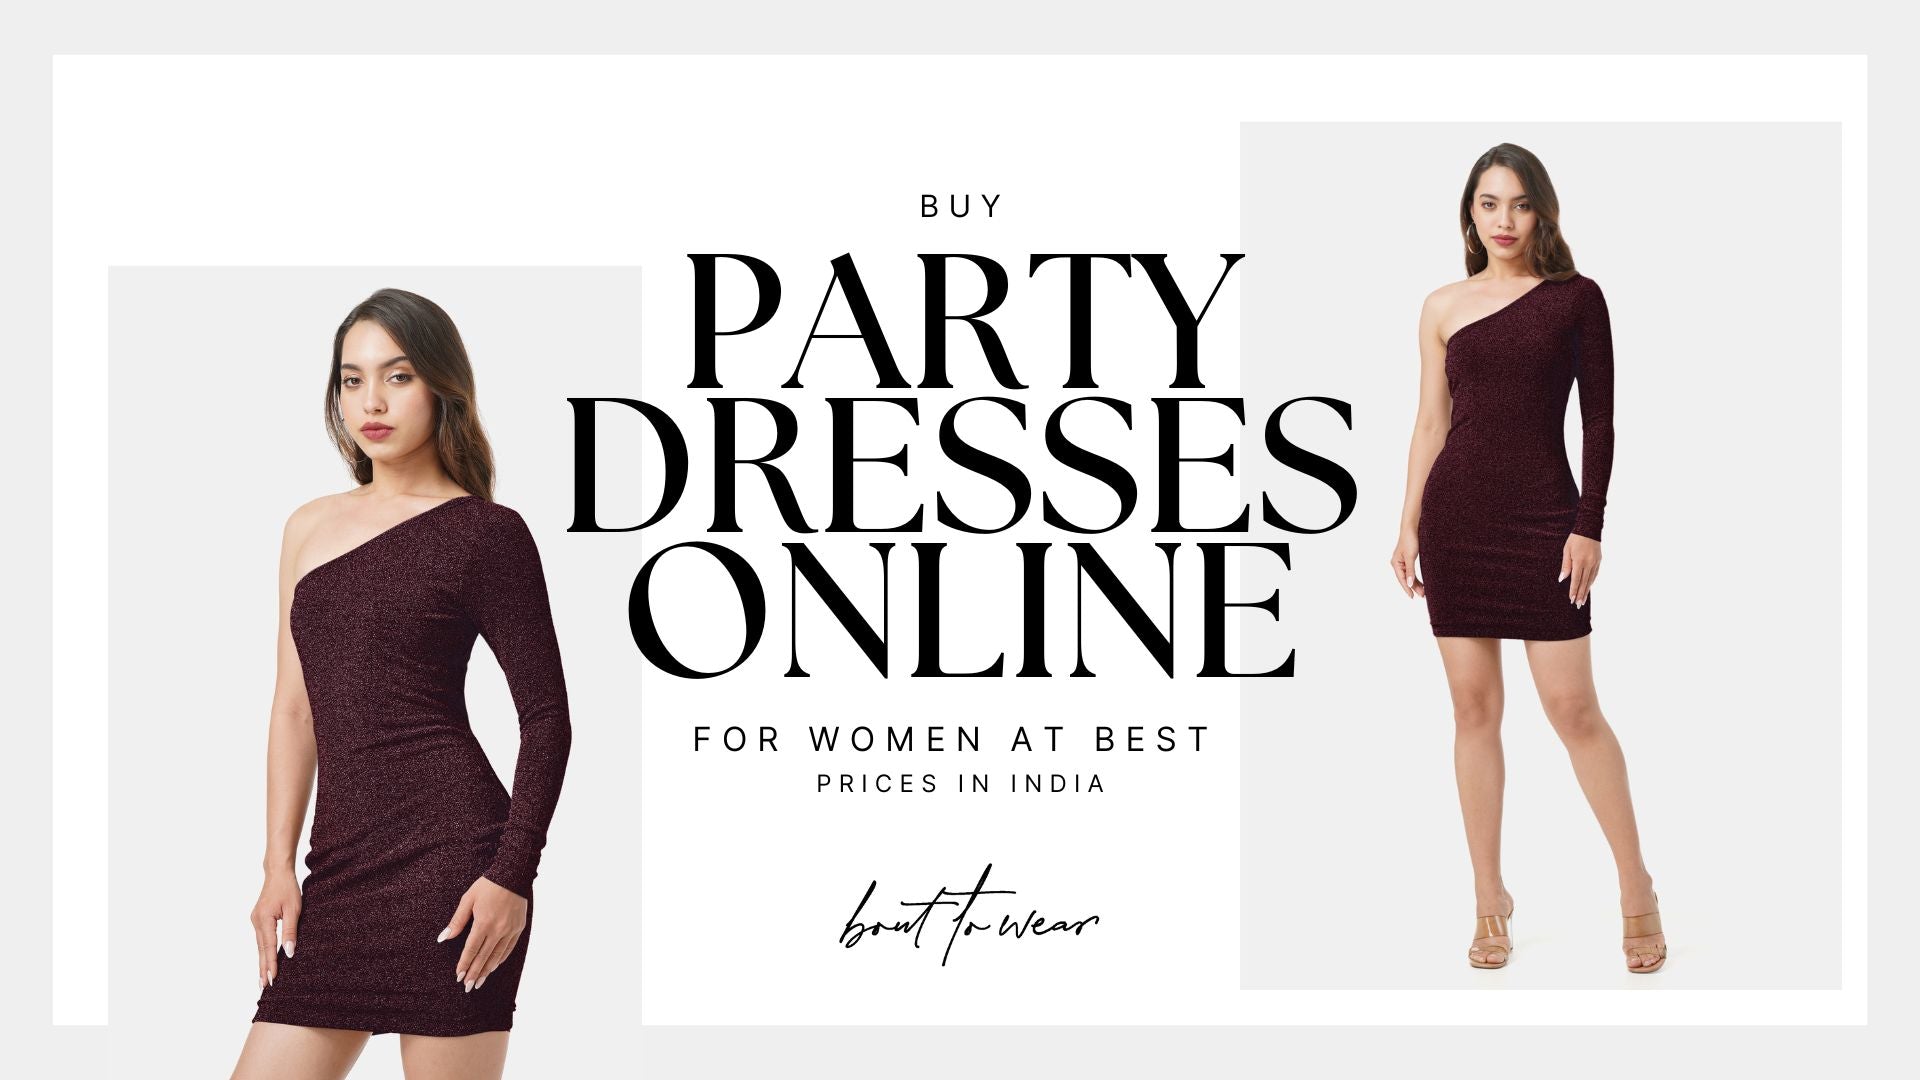 Buy Party Dresses Online For Women at Best Prices In India